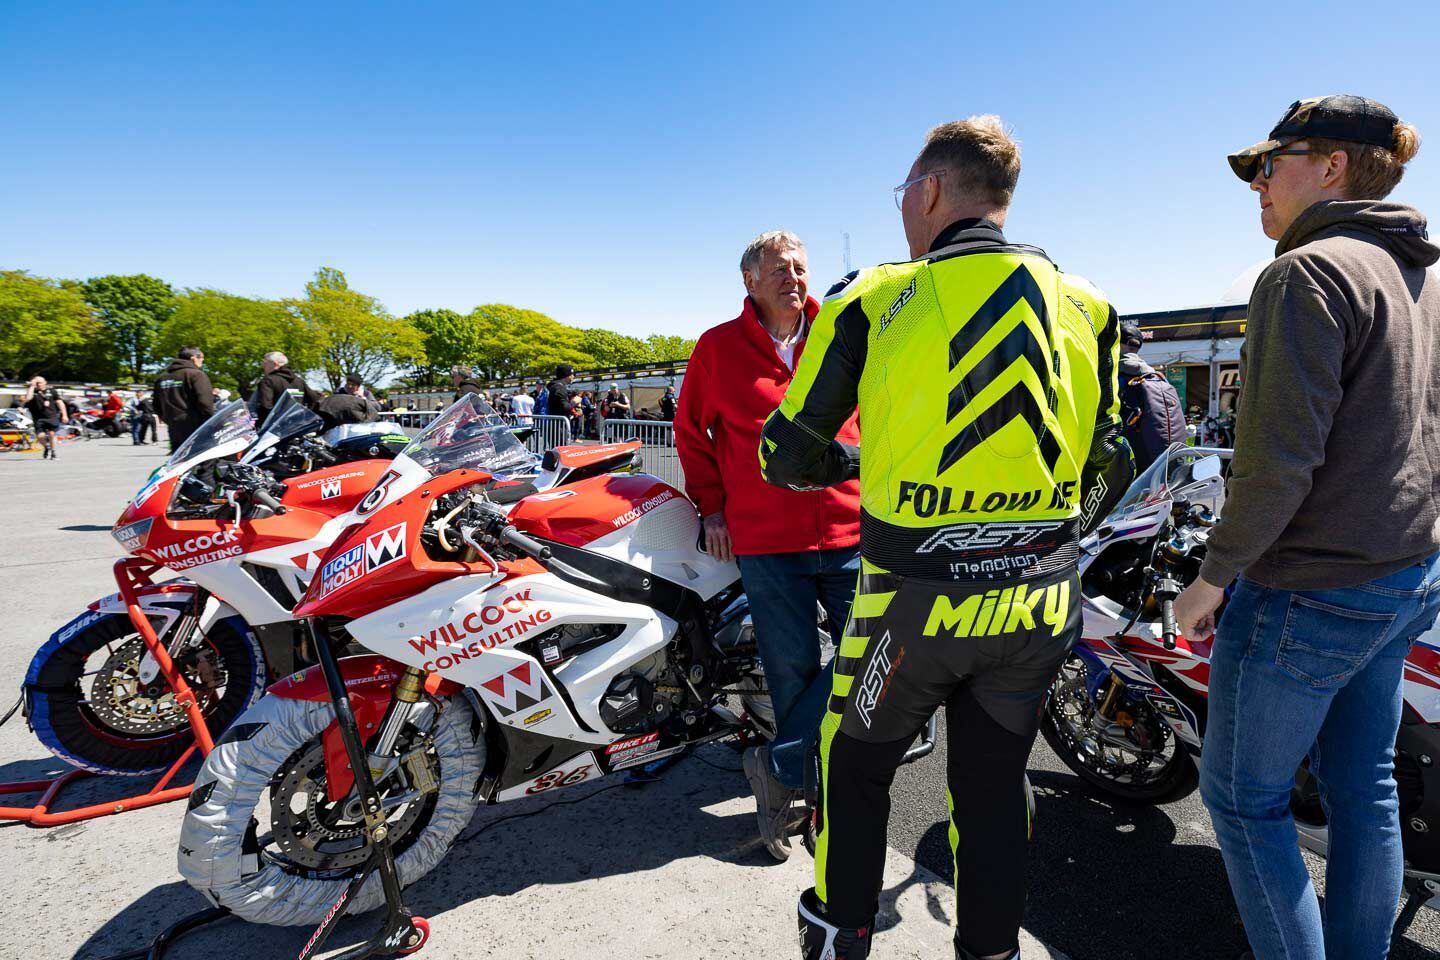 Richard “Milky” Quayle, winner of the 1994 and 1996 TTs, works with newcomers throughout the spring and during practice week to be sure they are adequately prepared for the course and the speed of roadracing.